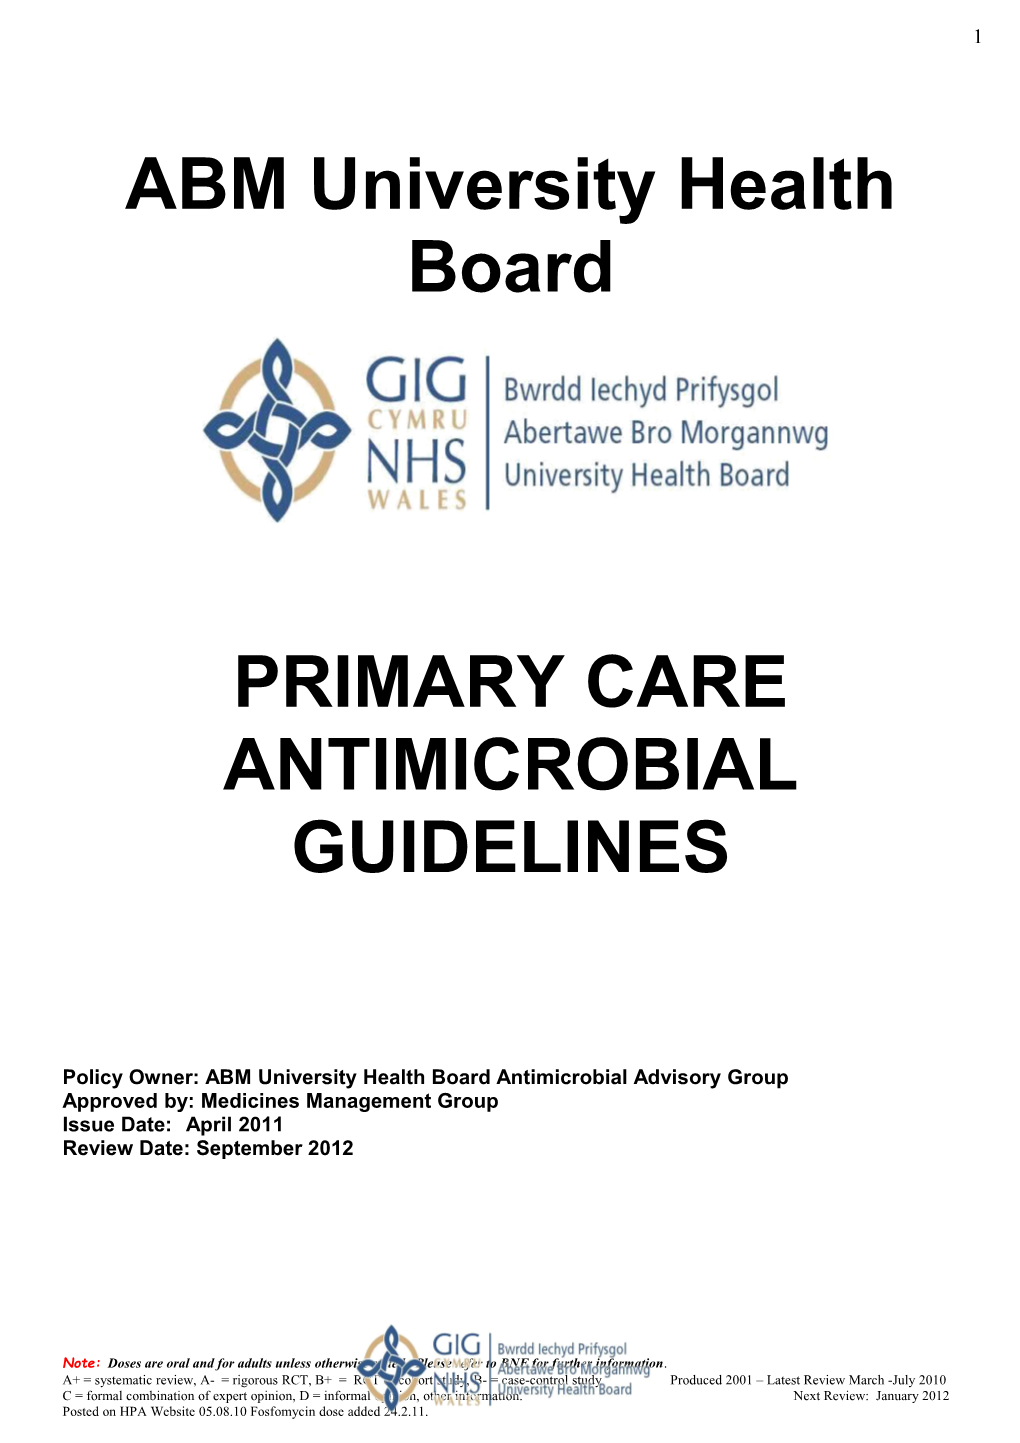 Primary Care Antimicrobial Guidelines